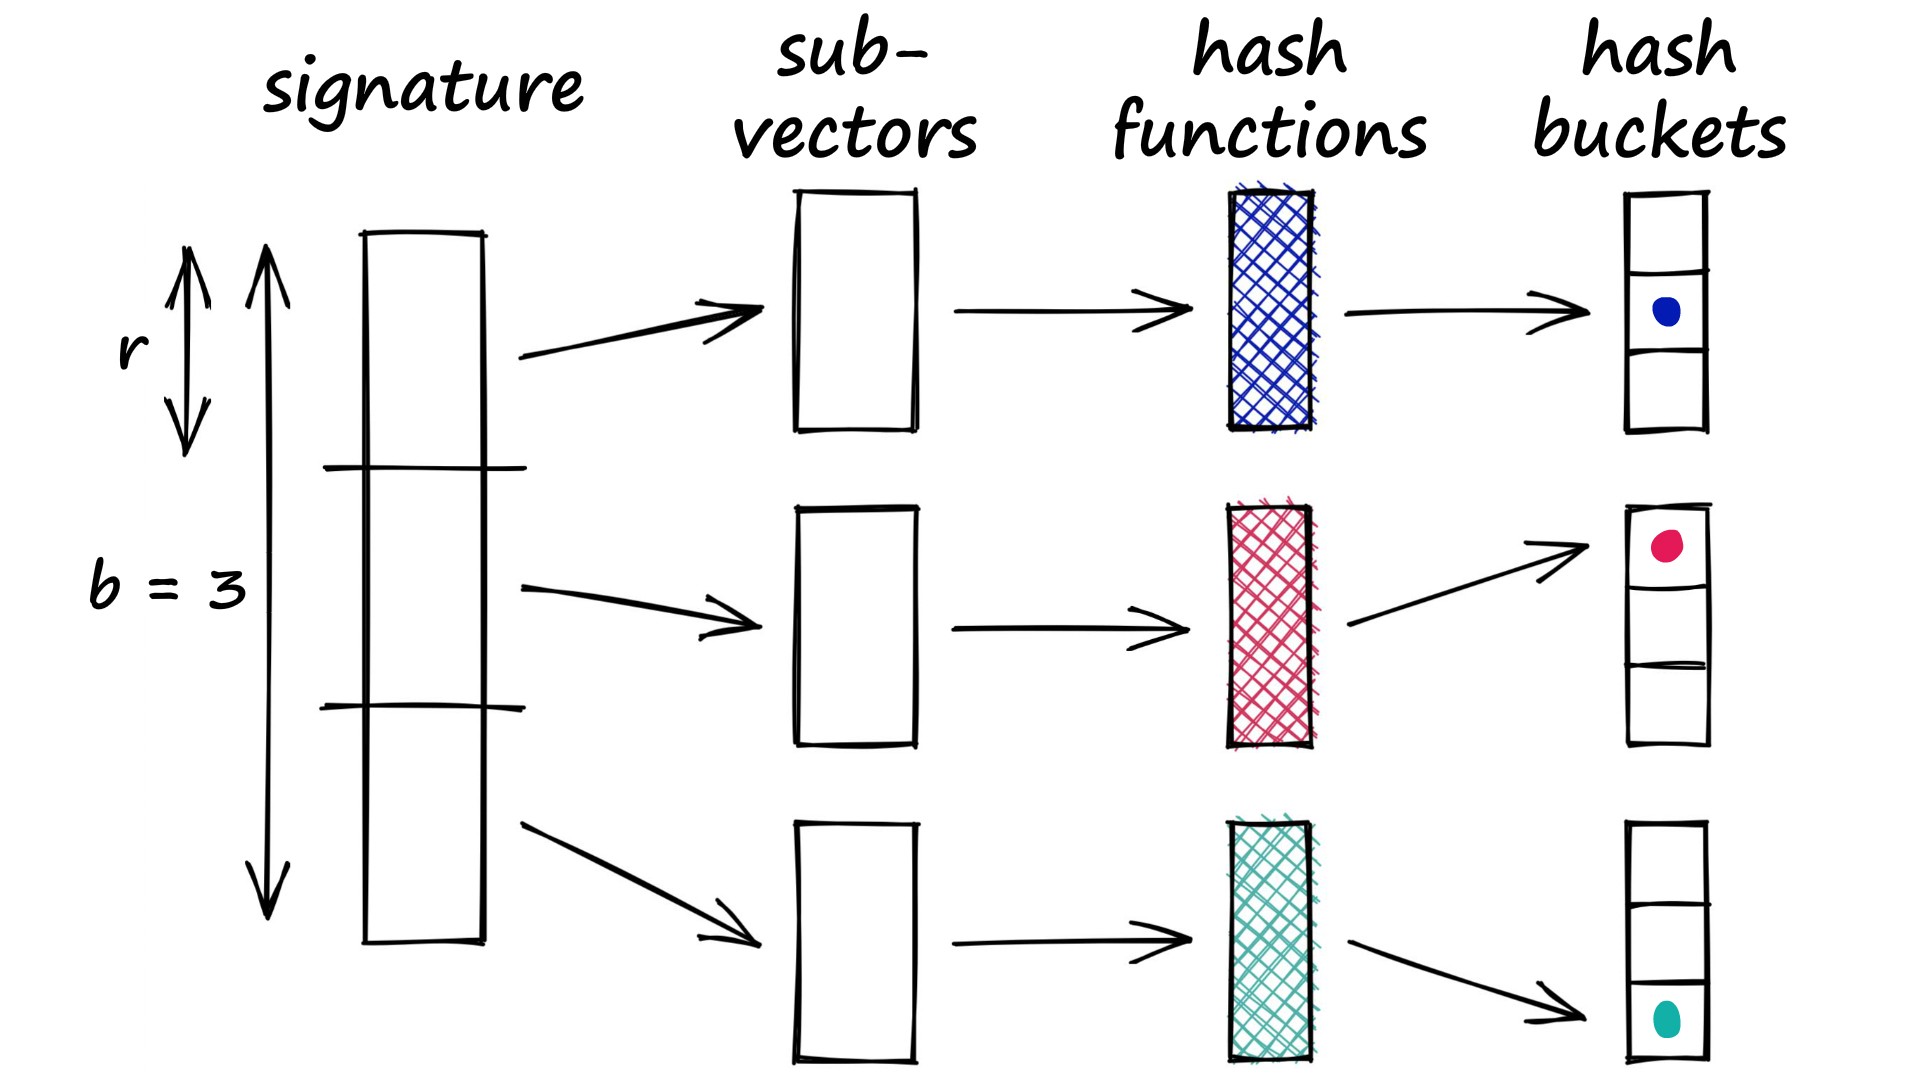 We split our signature into b sub-vectors, each is processed through a hash function (we can use a single hash function, or b hash functions) and mapped to a hash bucket.